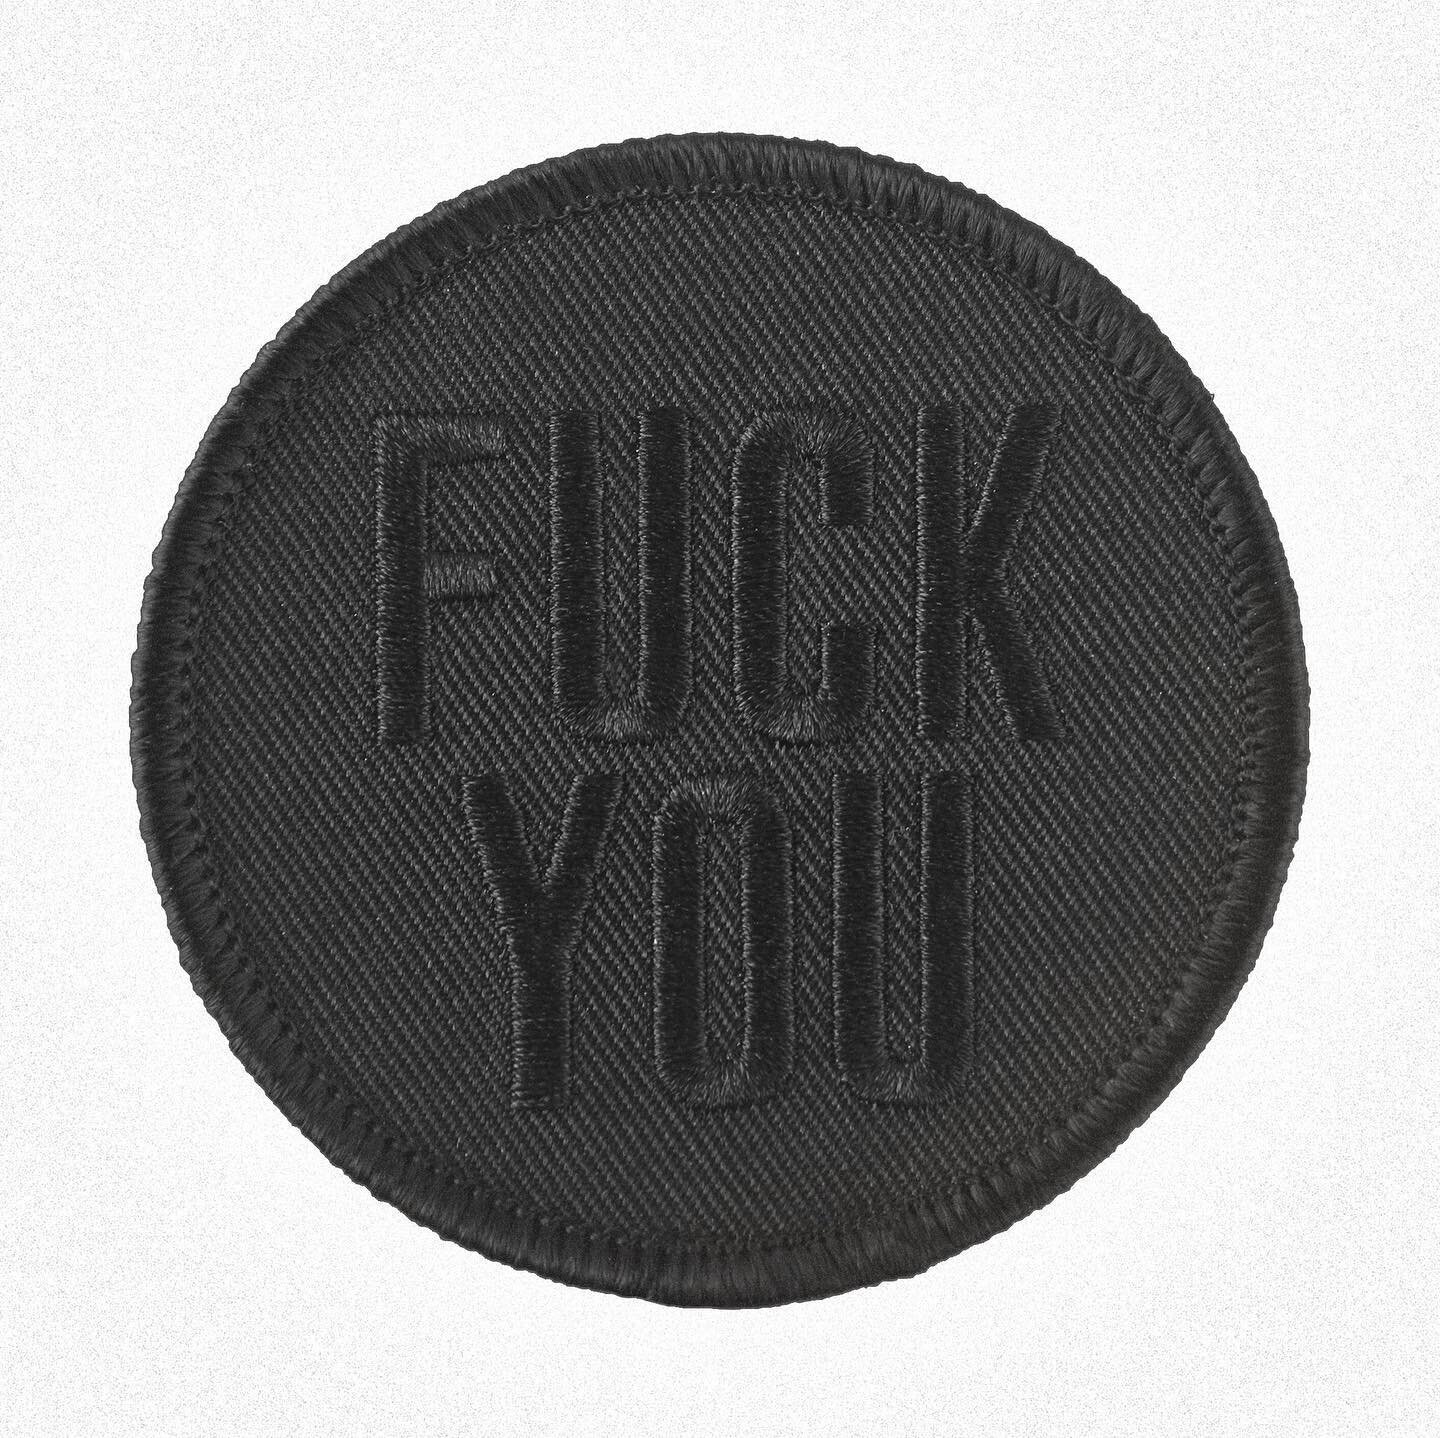 The FUCK YOU patches are back instock. 2.5&rdquo; of sexy black on black. Fresh outta the oven, commmennn get them!
#deathpatches #fuckyou #blackonblack